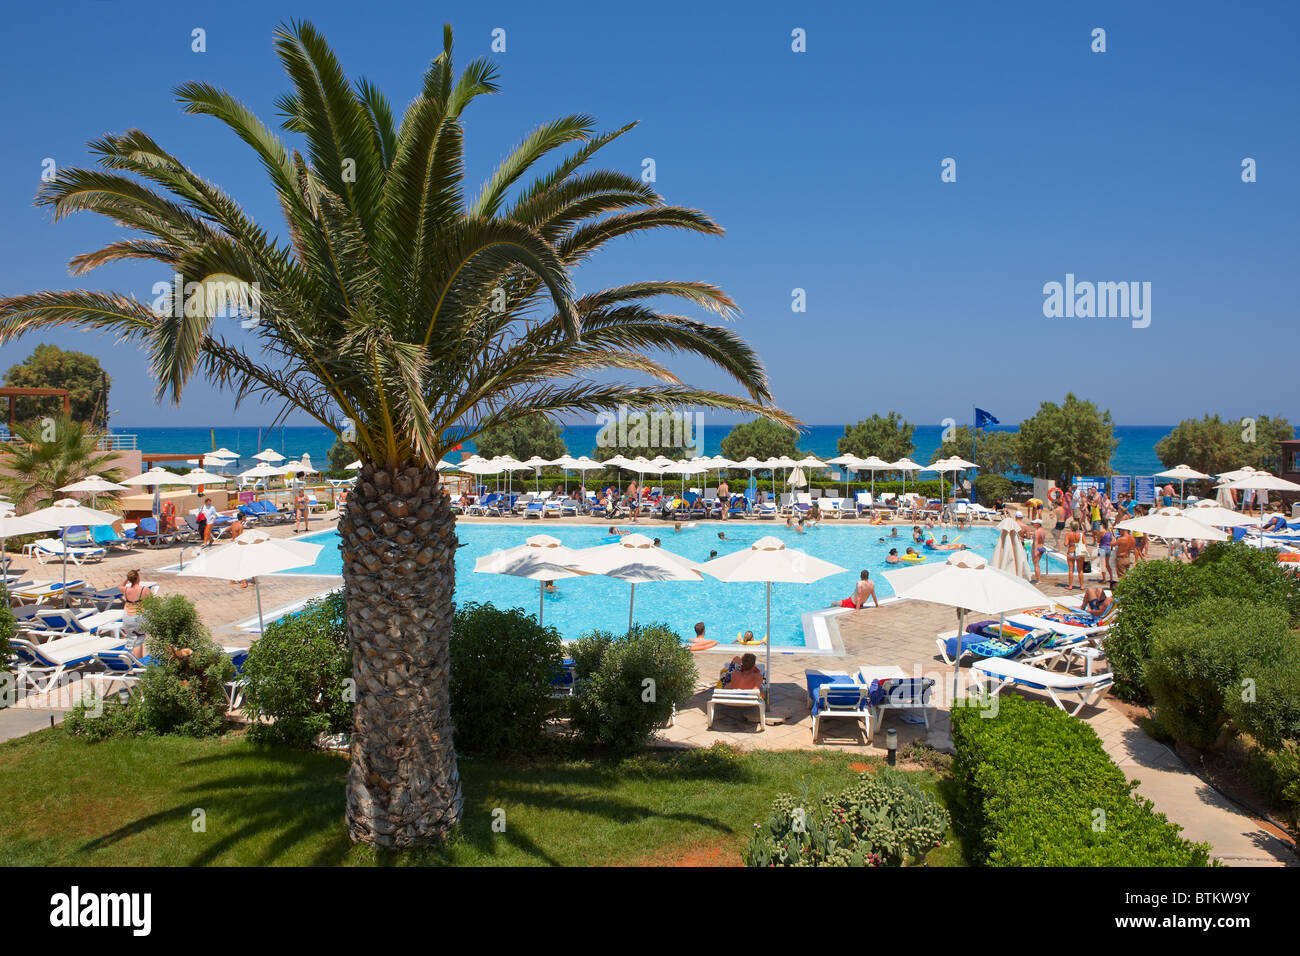 View of the pool area at the Aquis Zorbas Village hotel. Crete island, Greece. Stock Photo